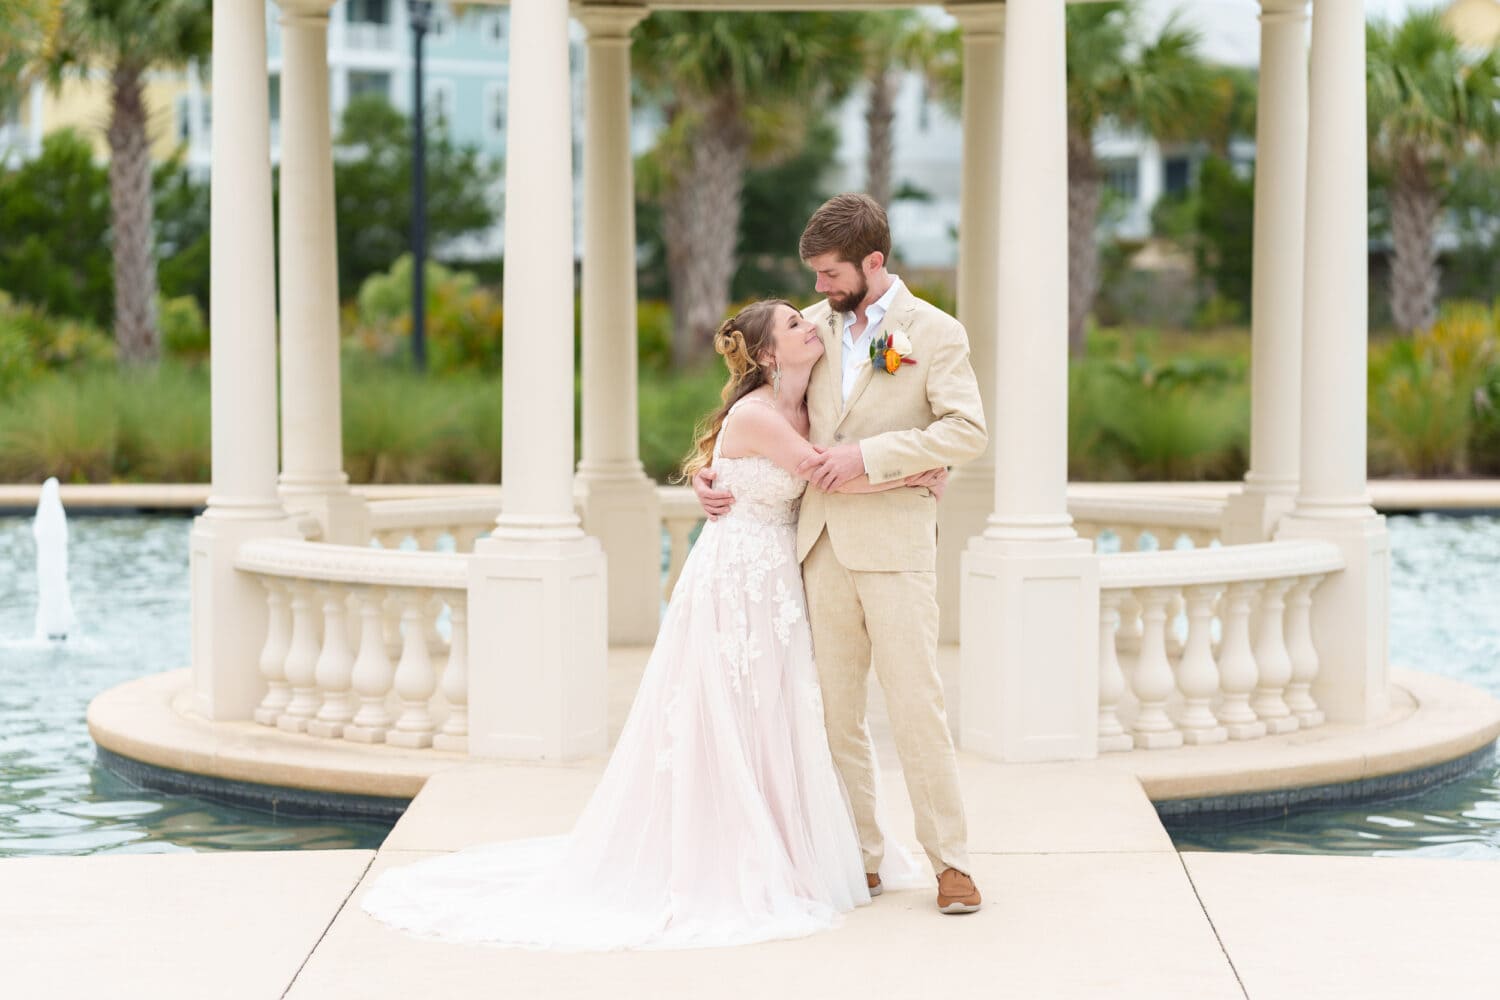 Bride hugging the groom - 21 Main Events - North Myrtle Beach